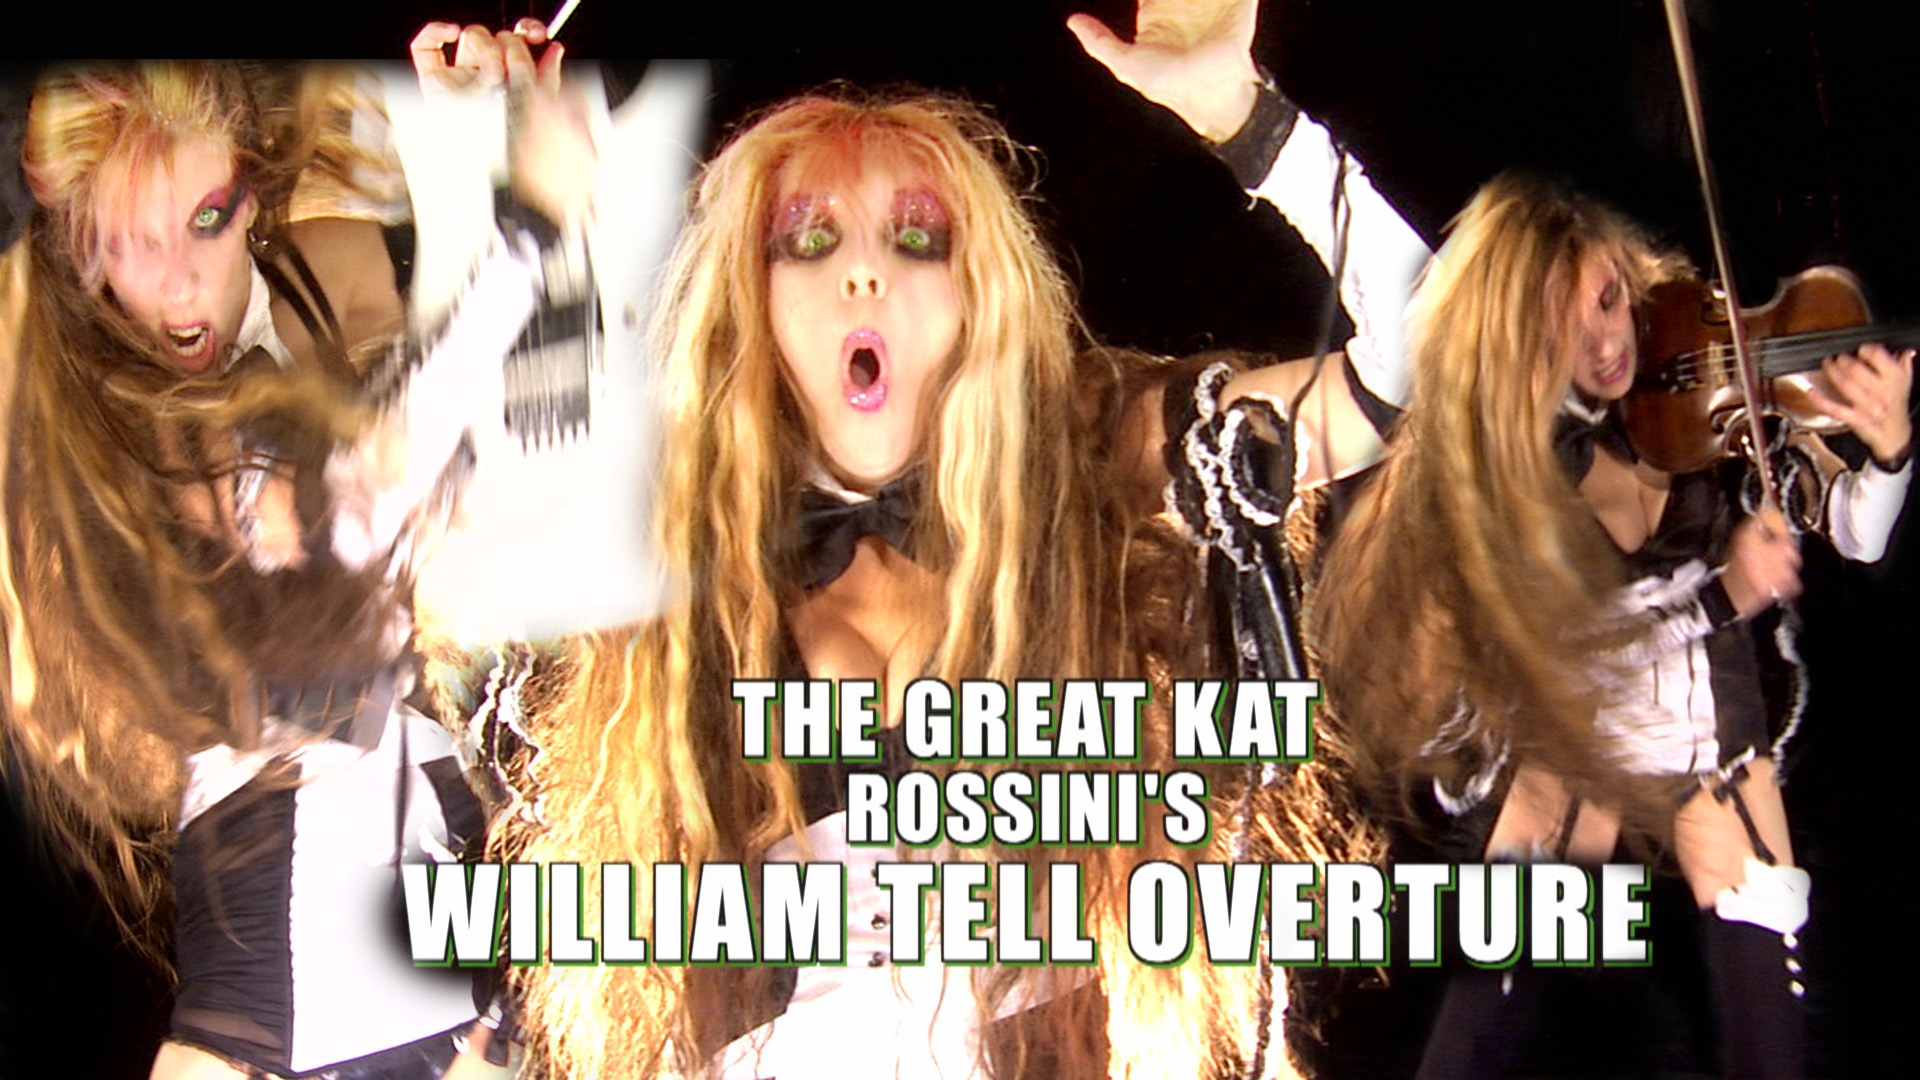 The Great Kat Shreds Guitar, Violin and Conducts William Tell Overture on iTunes